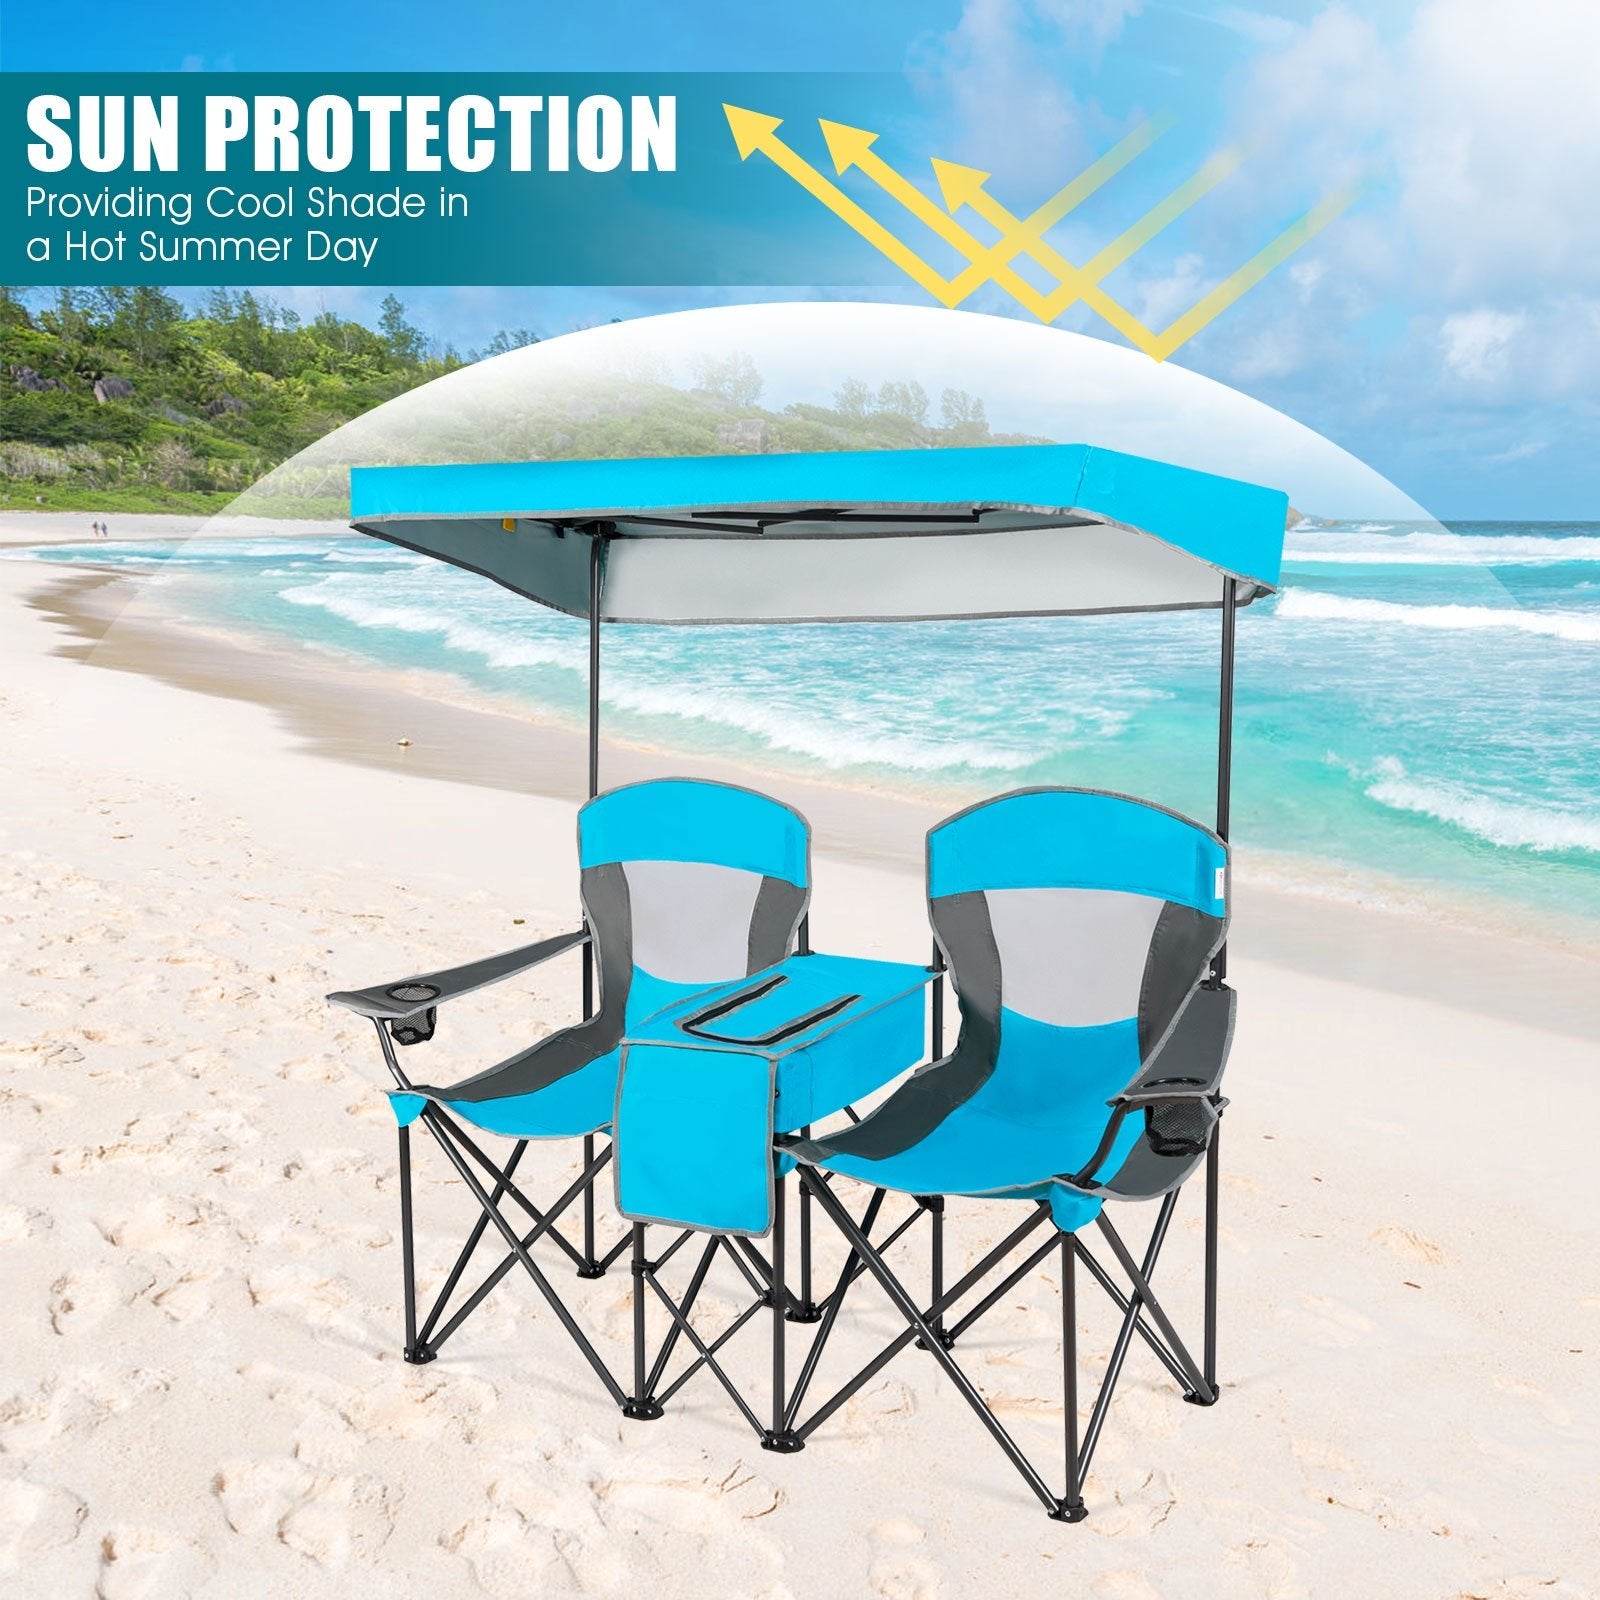 Portable Folding Camping Canopy Chairs with Cup Holder, Blue - Gallery Canada